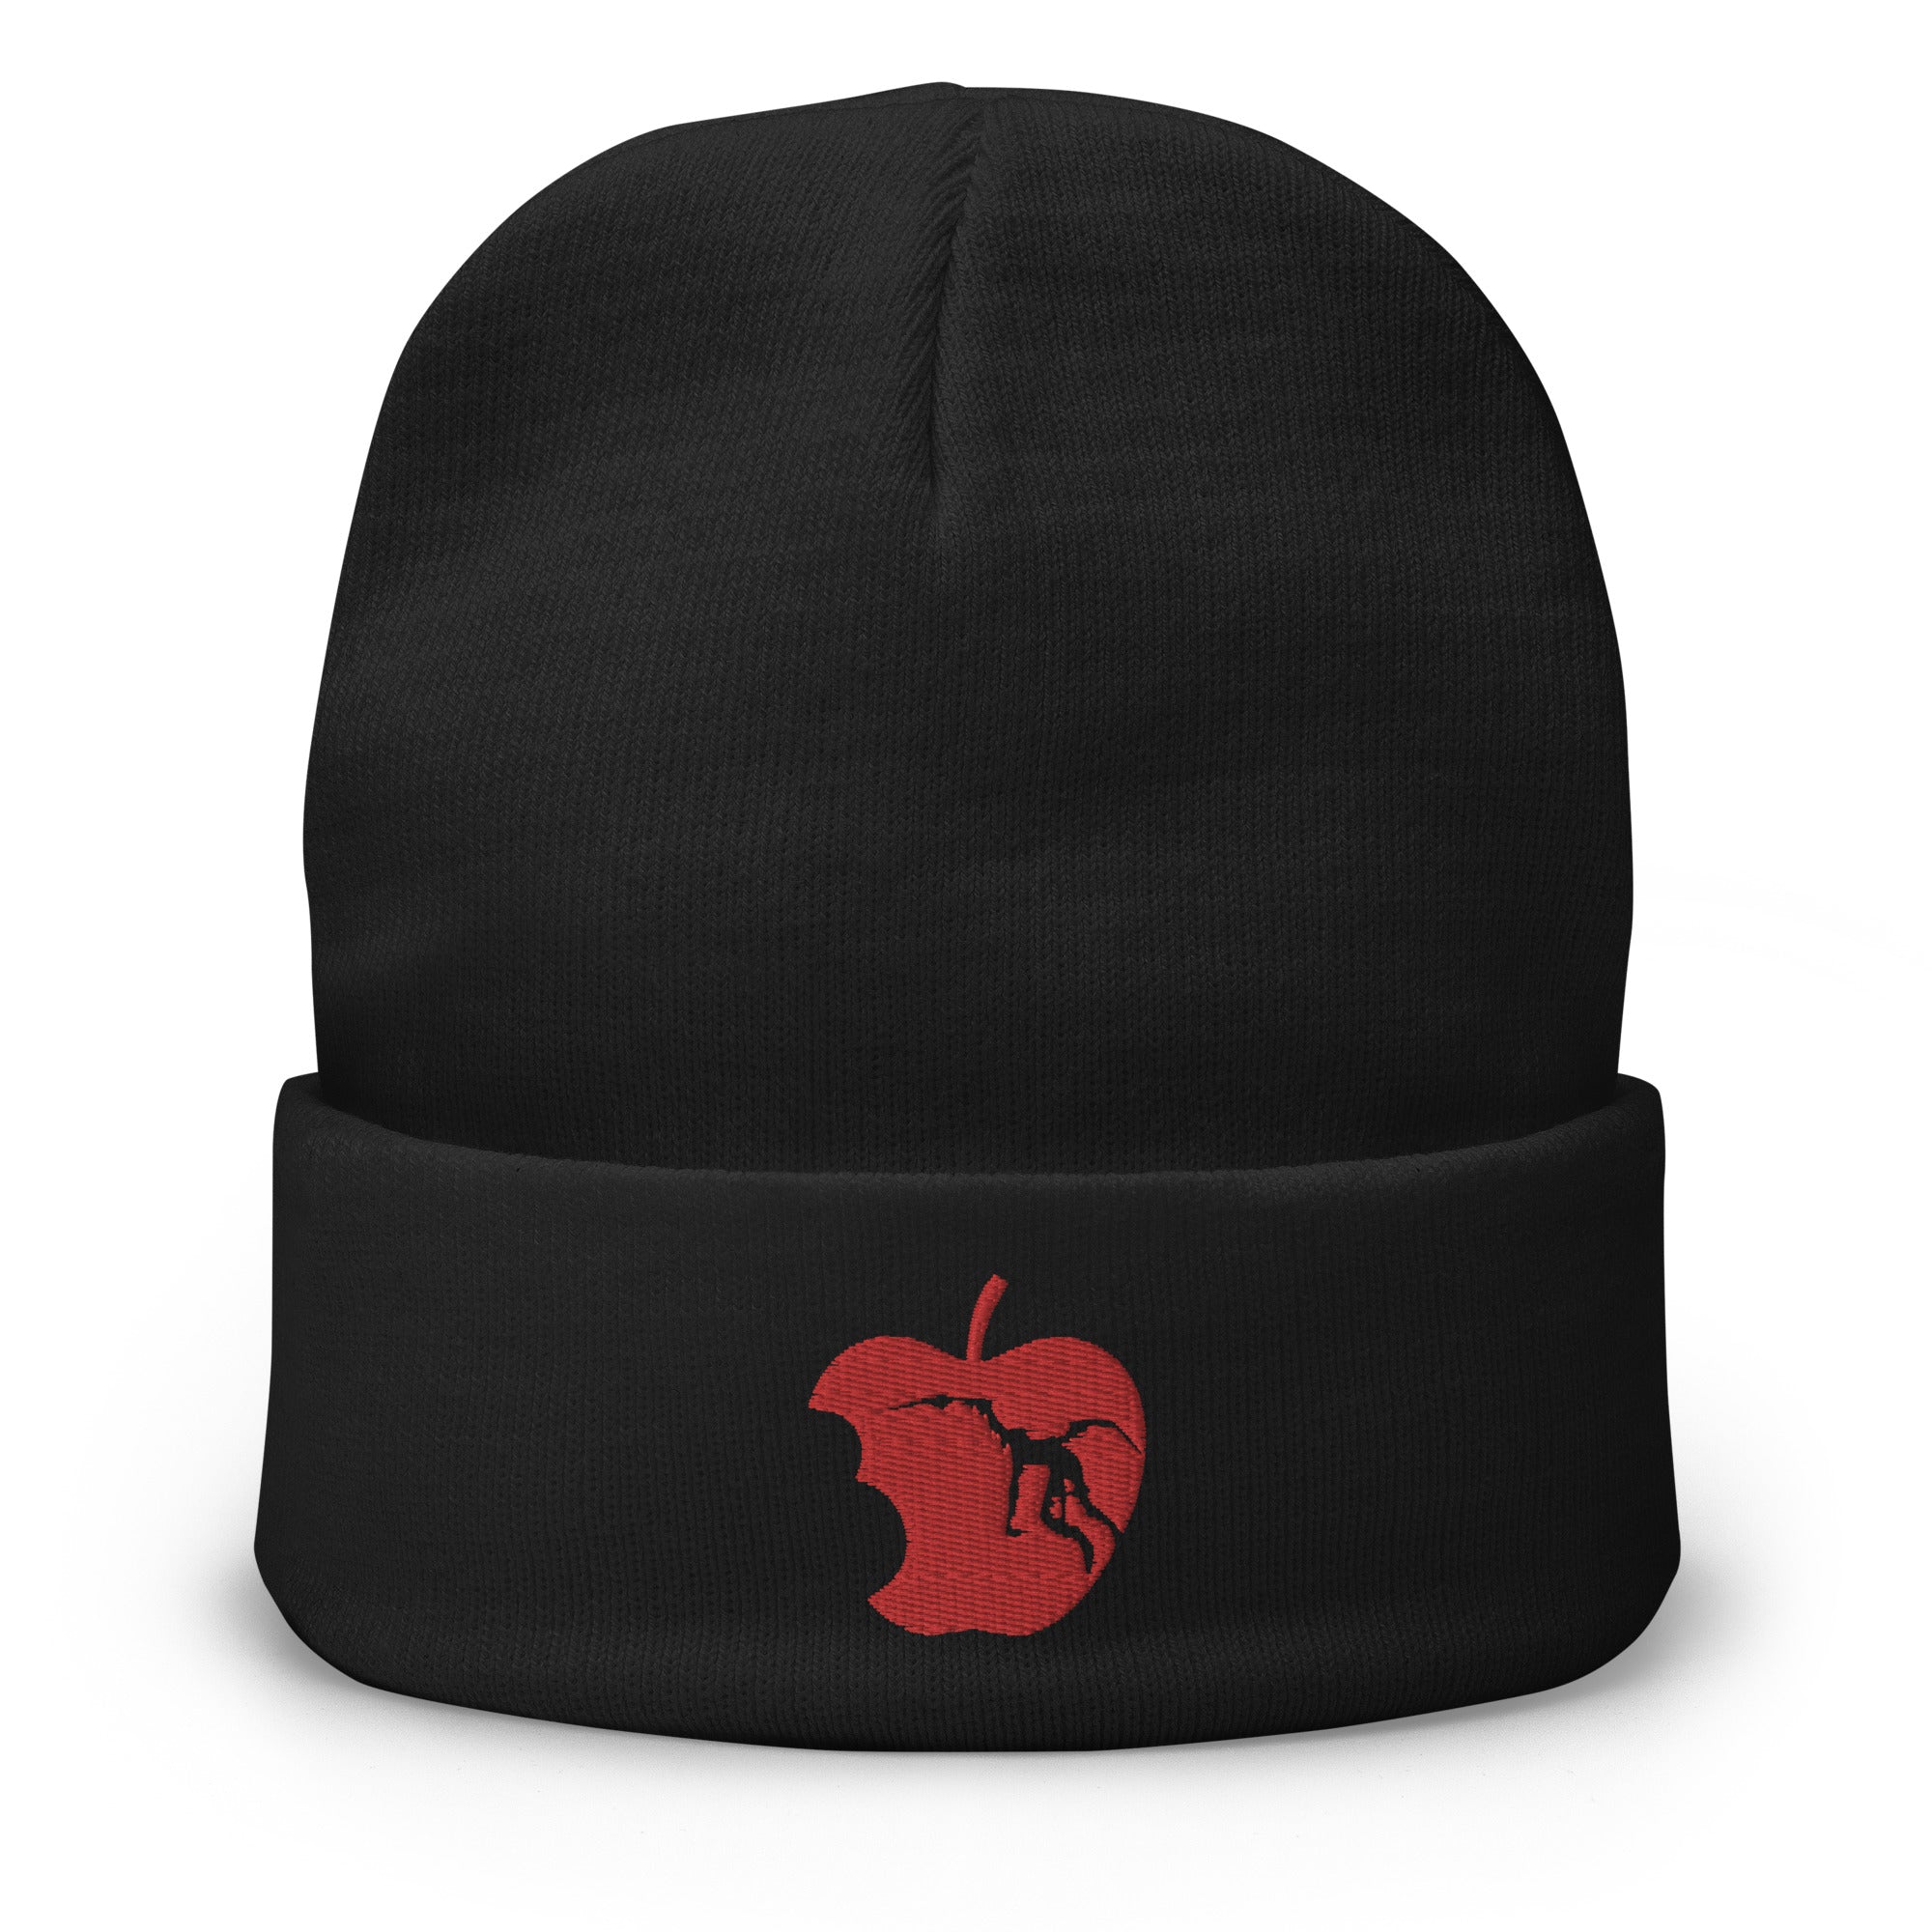 Red Apple Eaten by Ryuk Embroidered Cuff Beanie Anime Deathnote - Edge of Life Designs